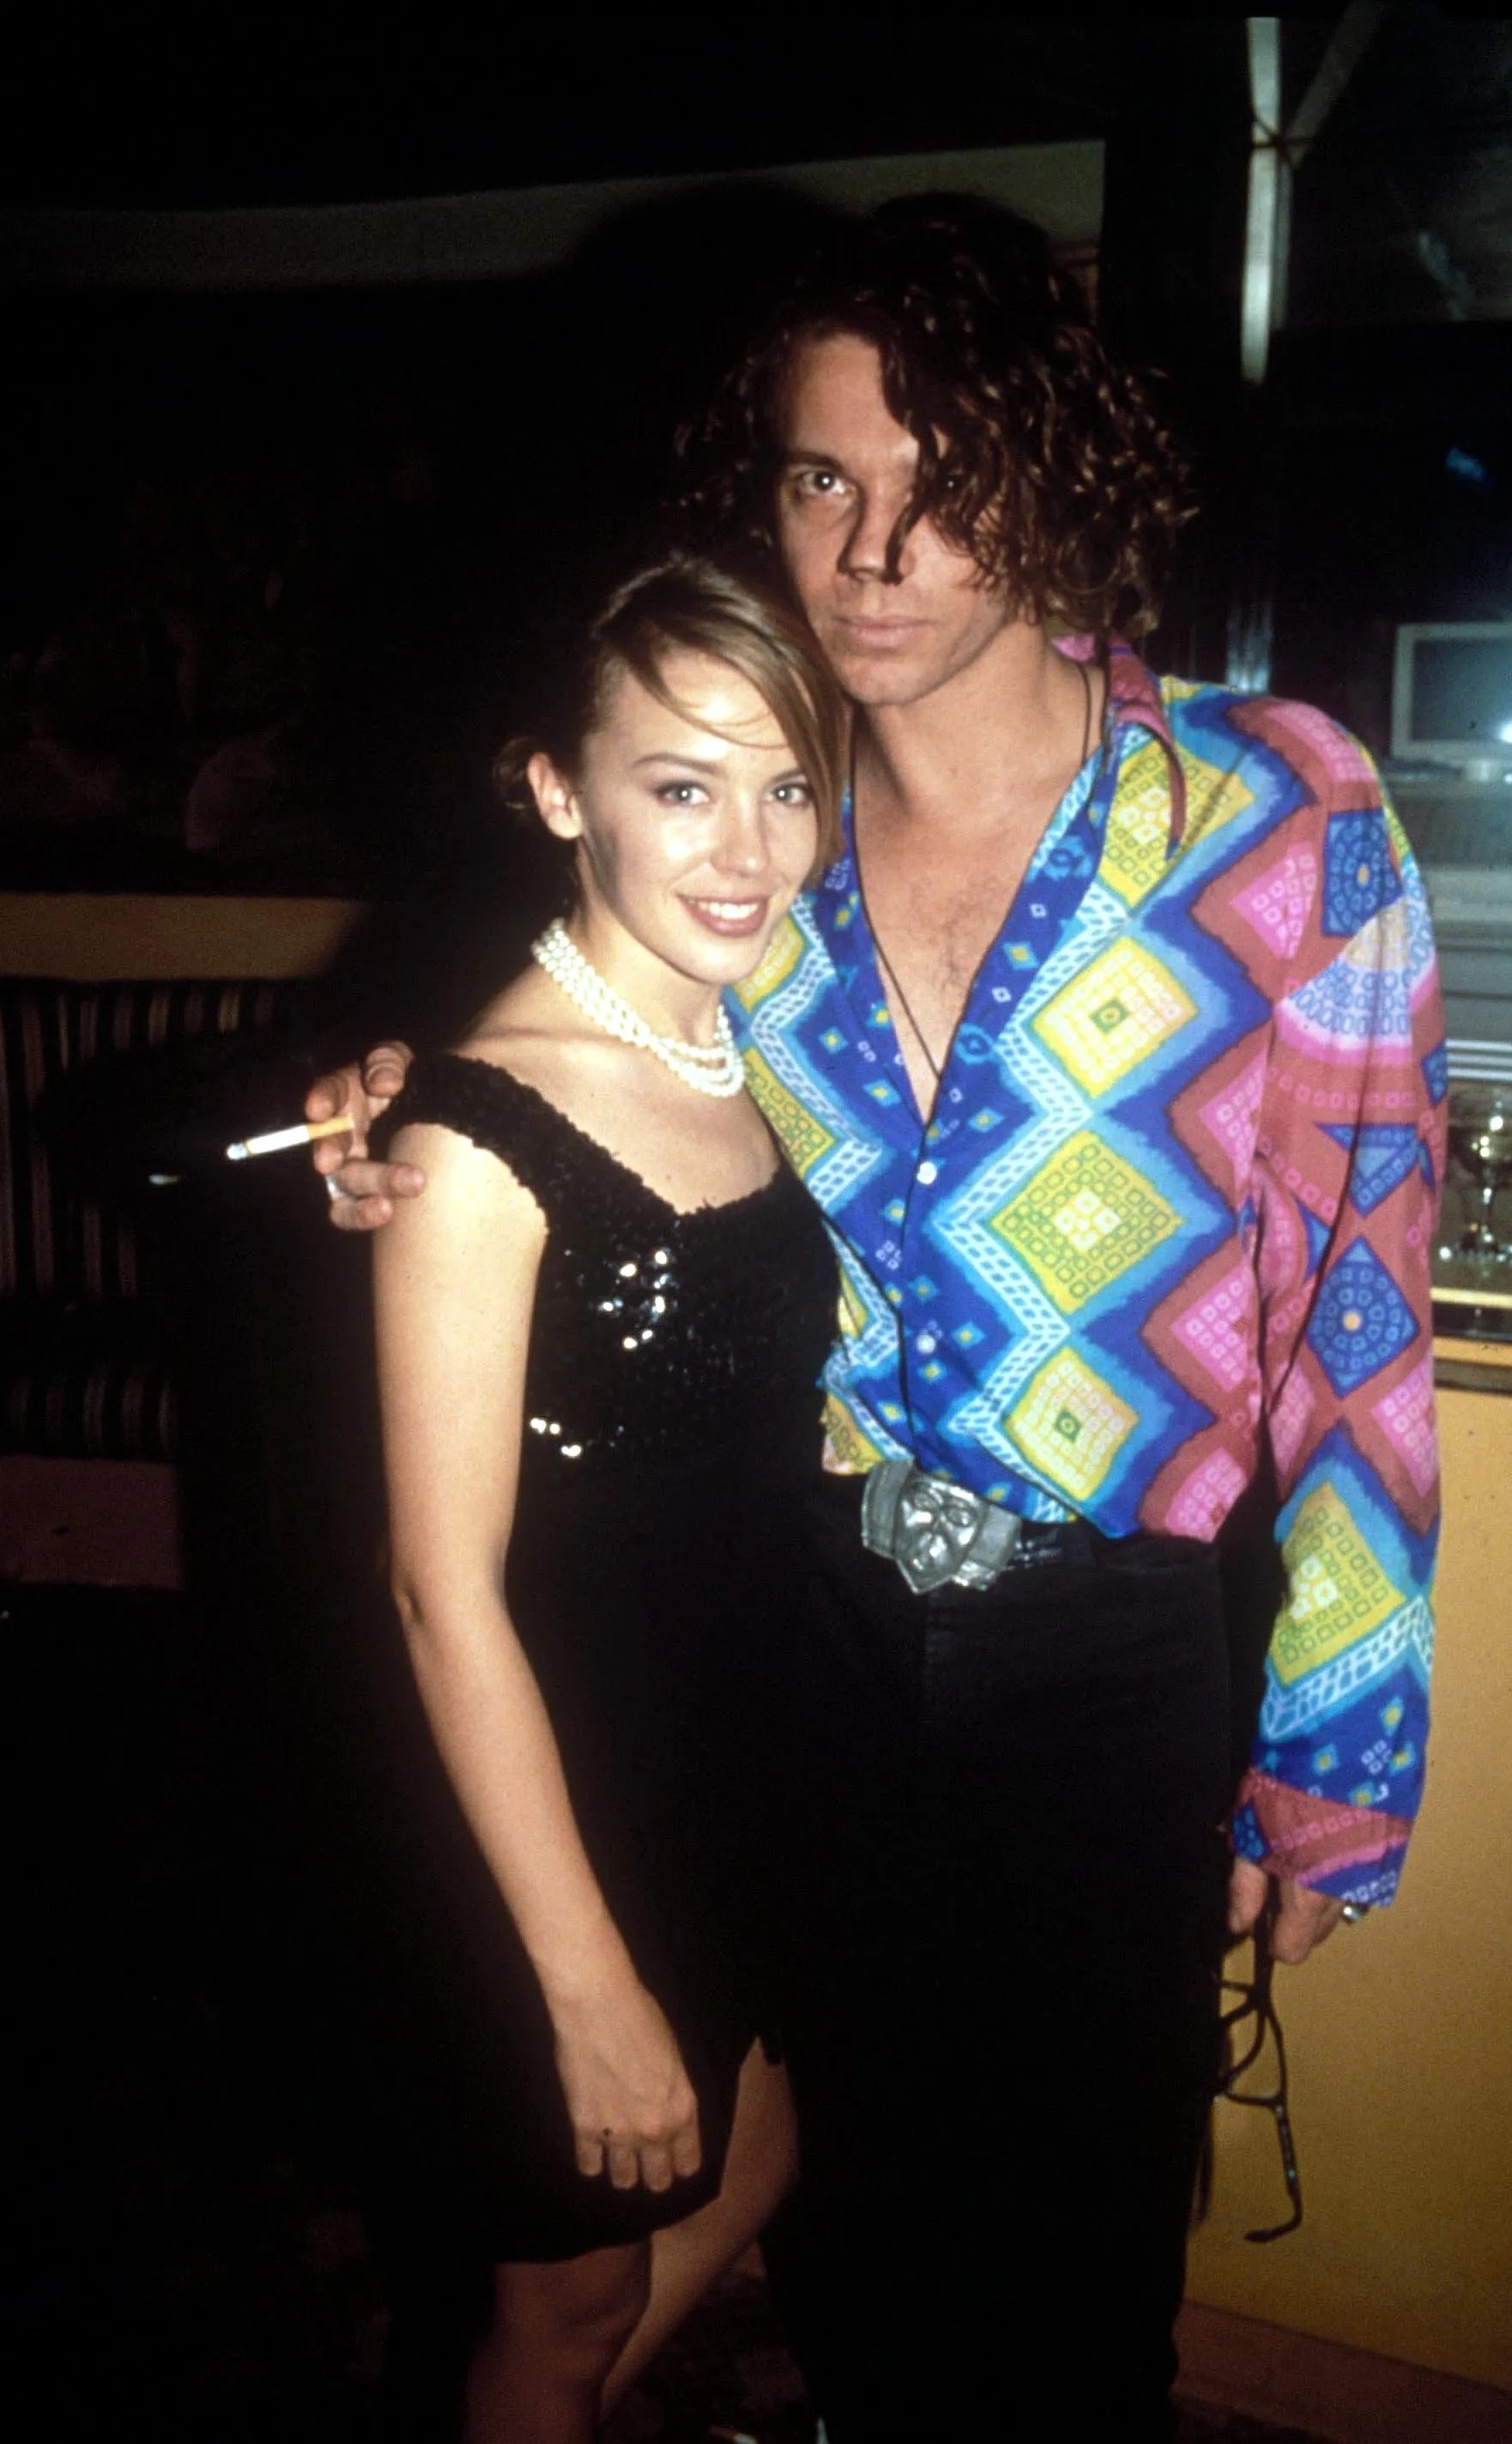 The hitmaker also dated late INXS singer Michael Hutchence